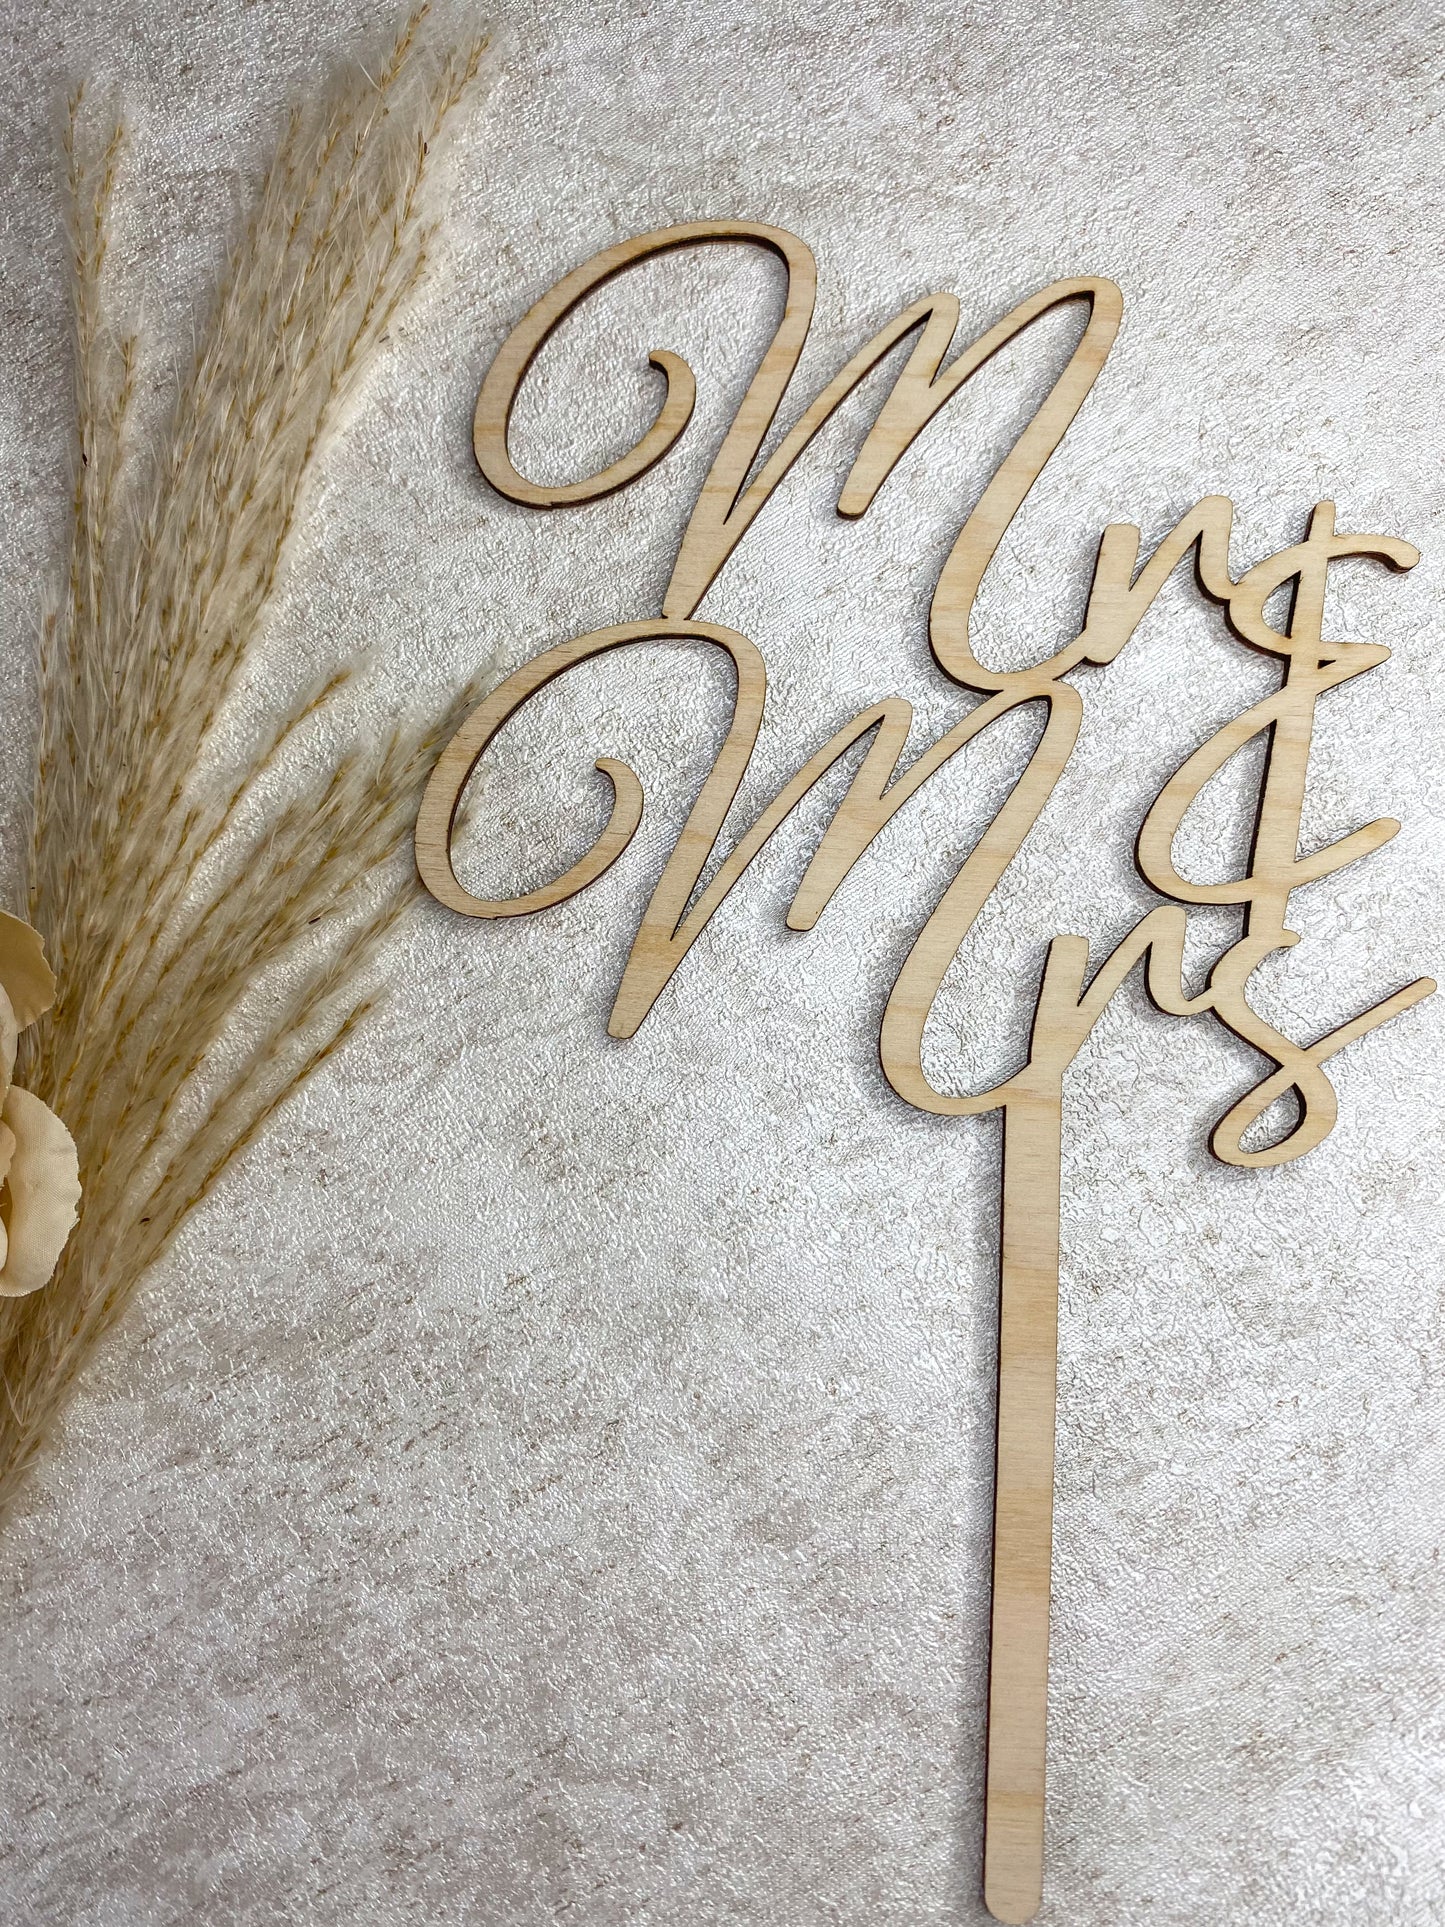 Rustic Wedding | Simple Wooden Mr and Mrs Cake Topper | Wooden Cake Topper | Couples Cake Topper | Wedding Cake Topper | Mr and Mrs Wooden